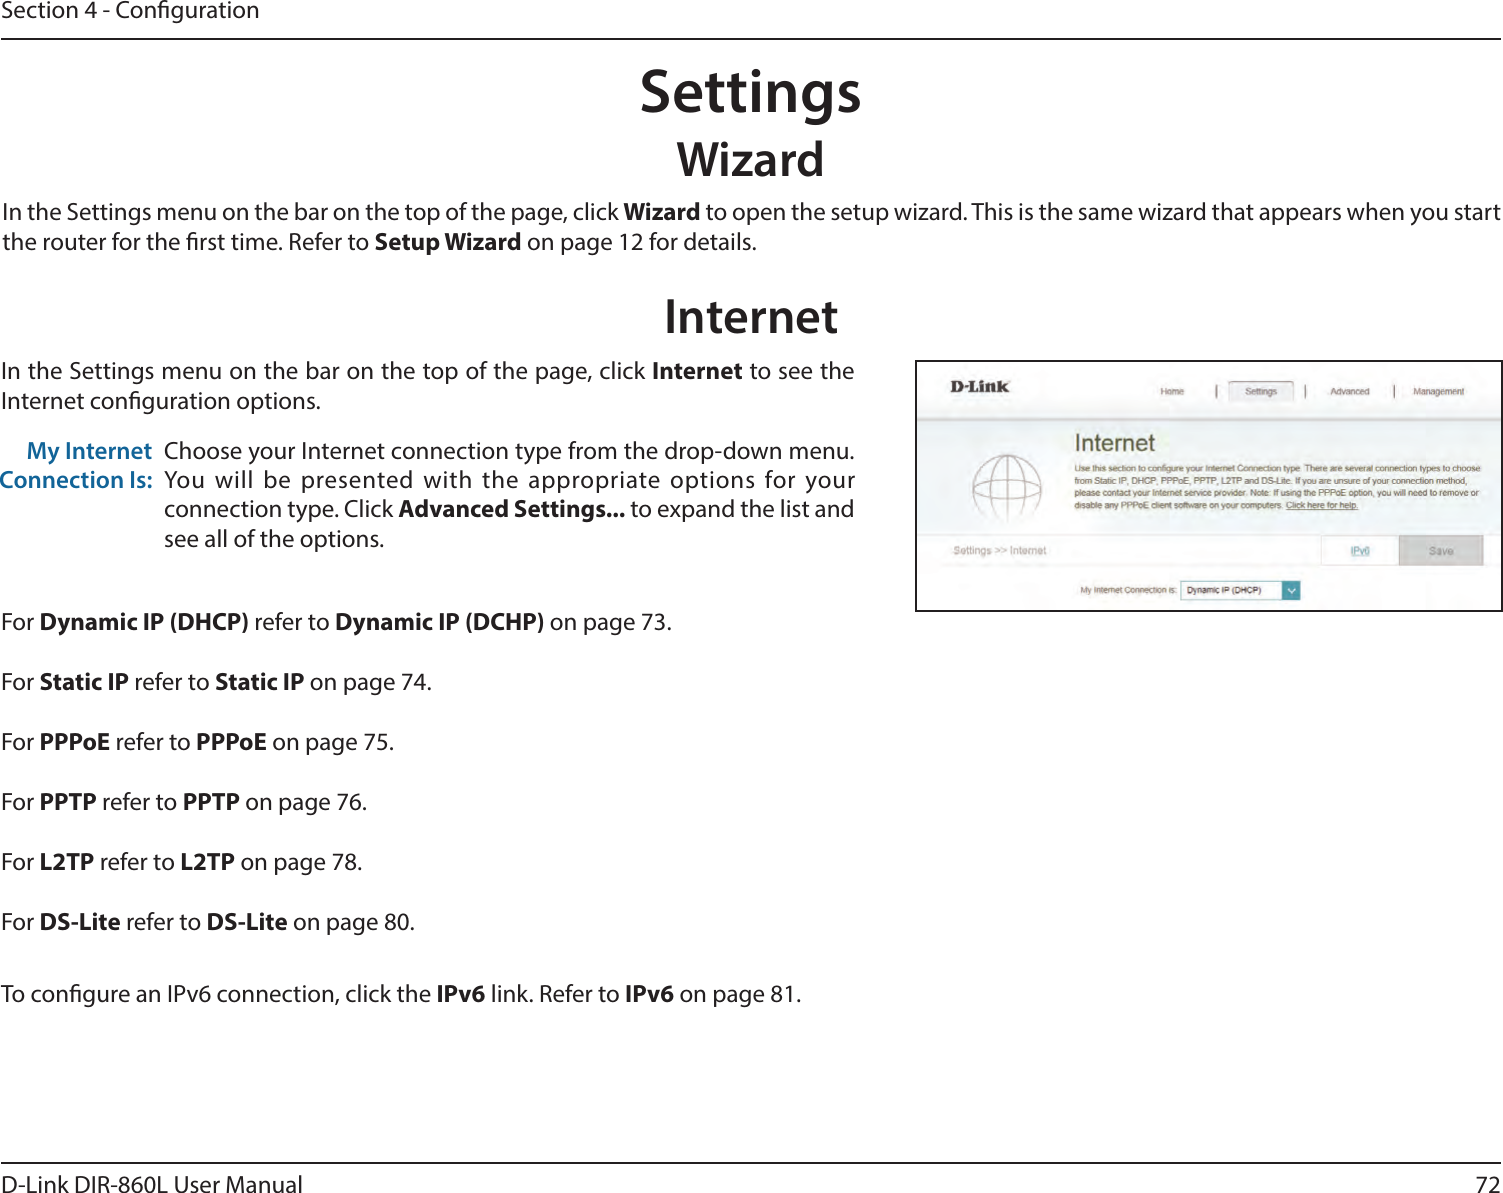 72D-Link DIR-860L User ManualSection 4 - CongurationSettingsWizardInternetIn the Settings menu on the bar on the top of the page, click Wizard to open the setup wizard. This is the same wizard that appears when you start the router for the rst time. Refer to Setup Wizard on page 12 for details.In the Settings menu on the bar on the top of the page, click Internet to see the Internet conguration options.Choose your Internet connection type from the drop-down menu. You will be presented with the appropriate options for your connection type. Click Advanced Settings... to expand the list and see all of the options.My Internet Connection Is:For Dynamic IP (DHCP) refer to Dynamic IP (DCHP) on page 73.For Static IP refer to Static IP on page 74.For PPPoE refer to PPPoE on page 75.For PPTP refer to PPTP on page 76.For L2TP refer to L2TP on page 78.For DS-Lite refer to DS-Lite on page 80.To congure an IPv6 connection, click the IPv6 link. Refer to IPv6 on page 81.